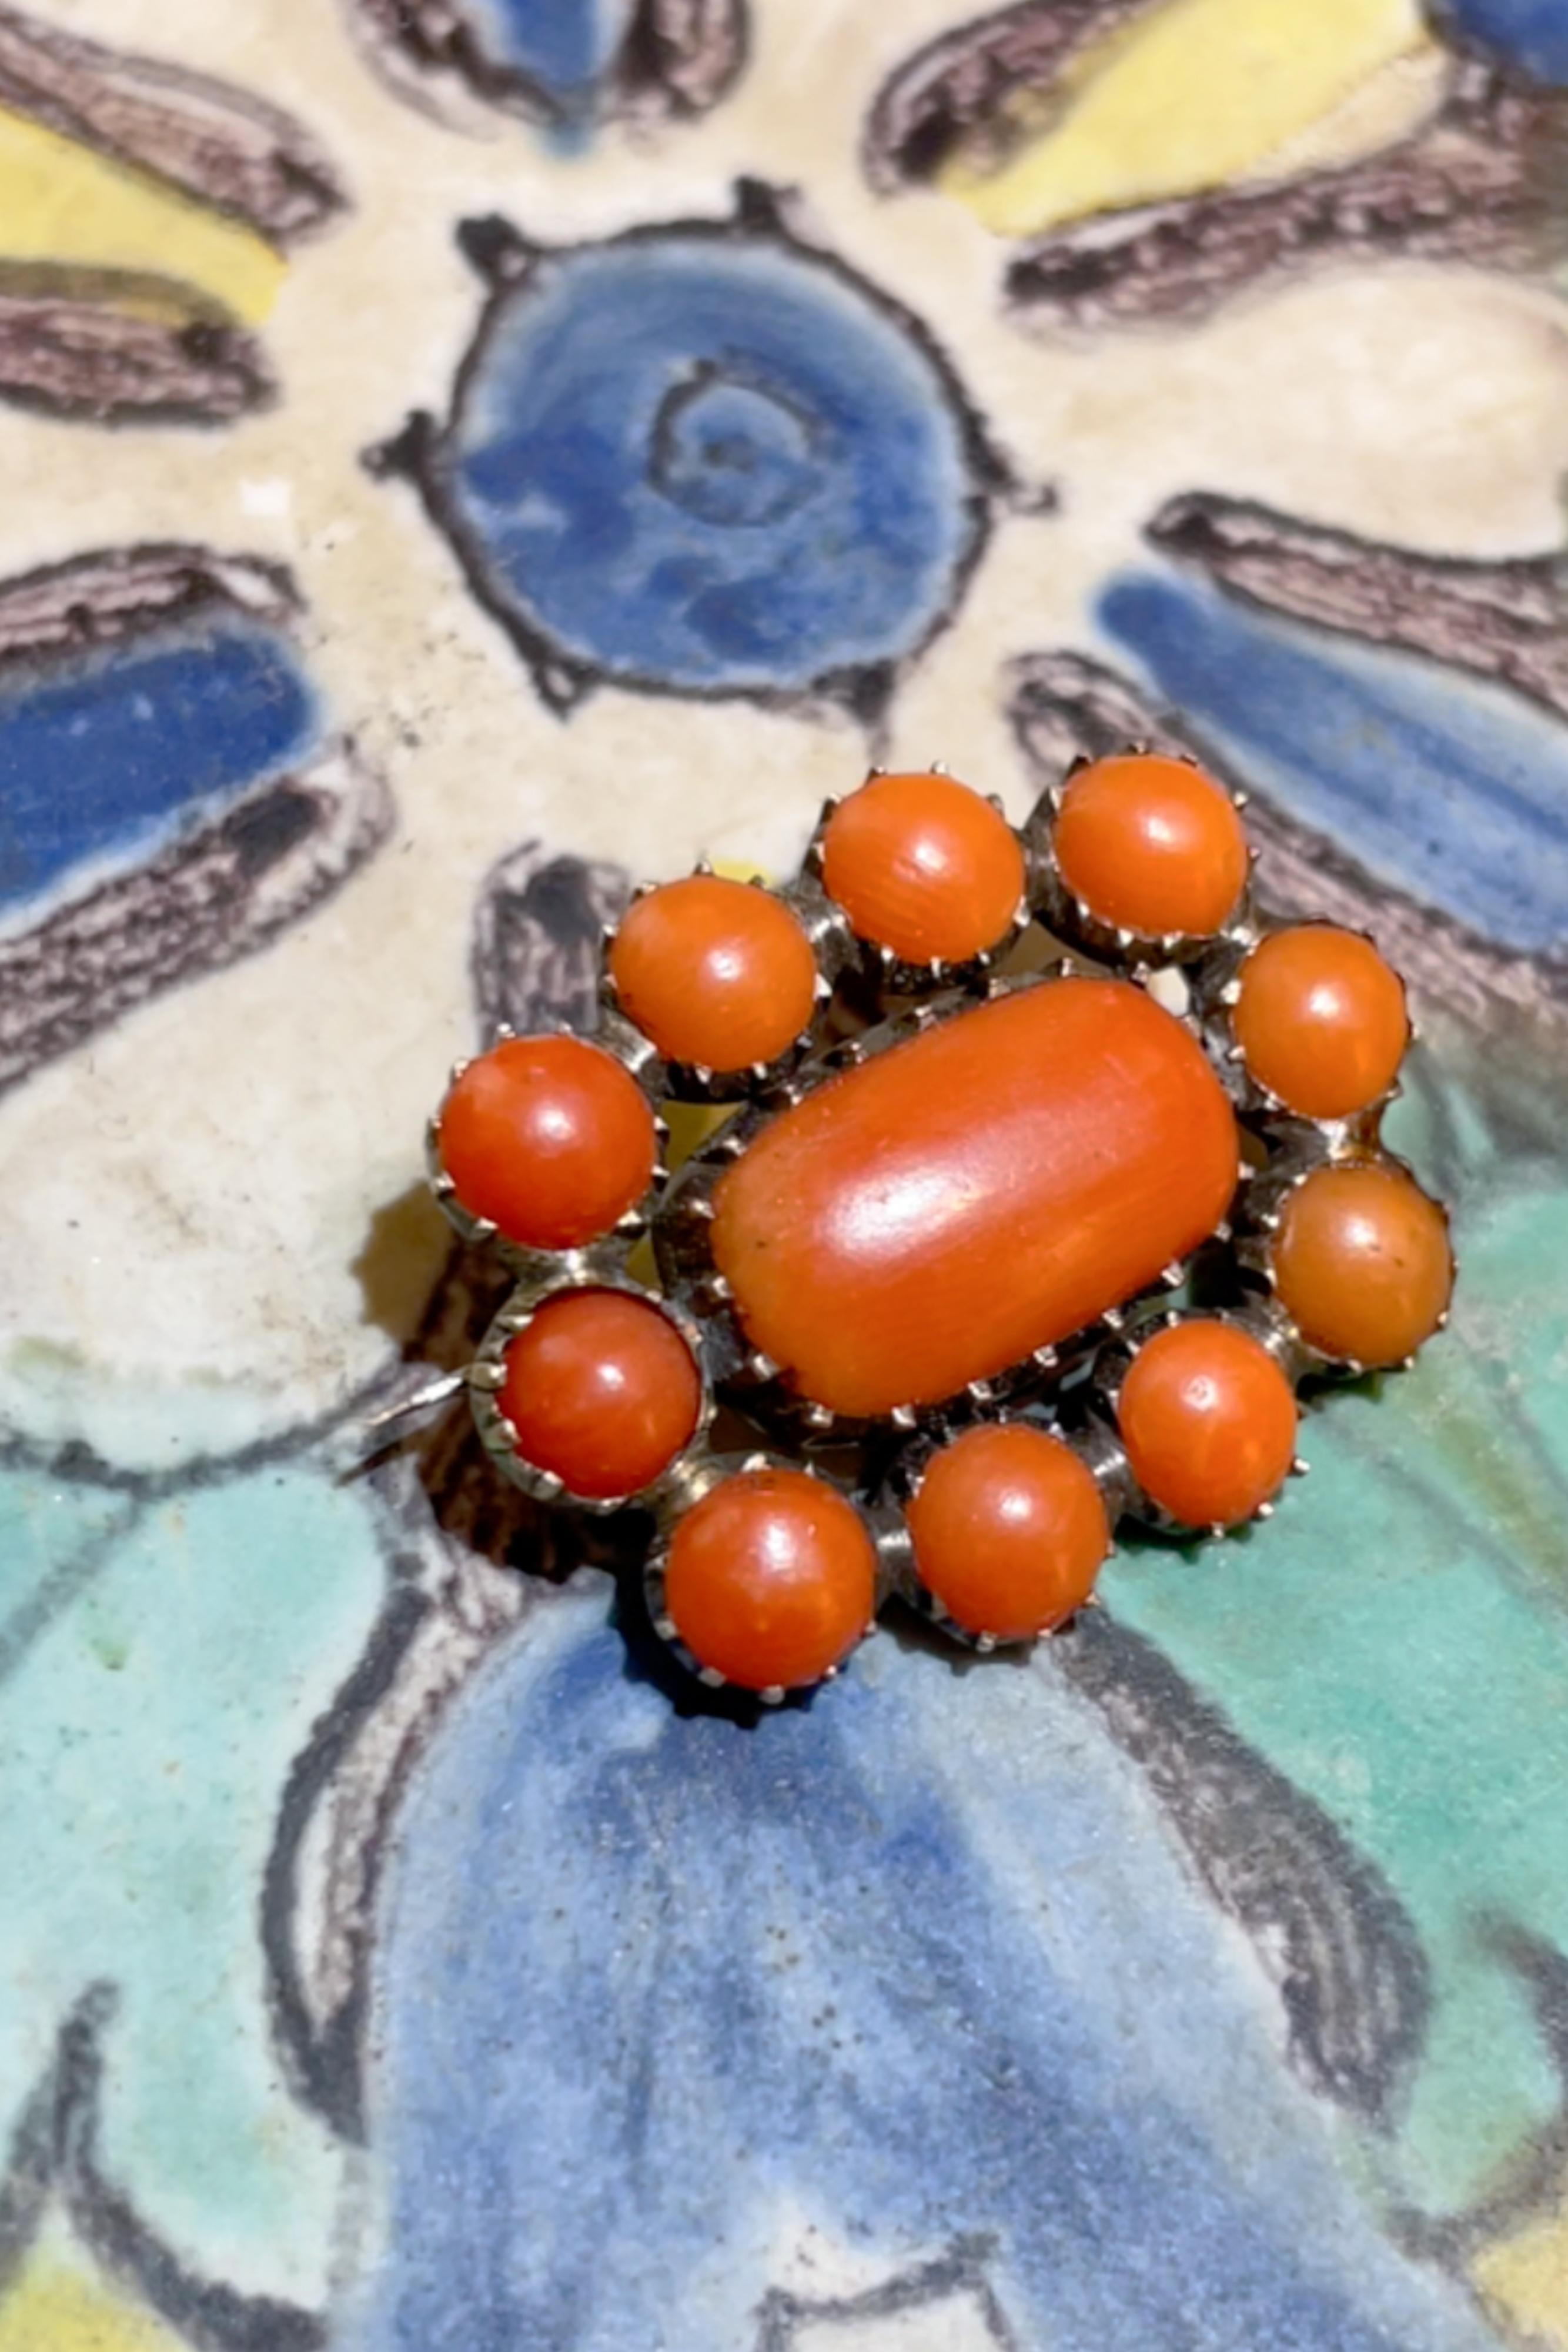 Early 19th century Georgian era English Coral and Gold Brooch. - English School Art by Unknown